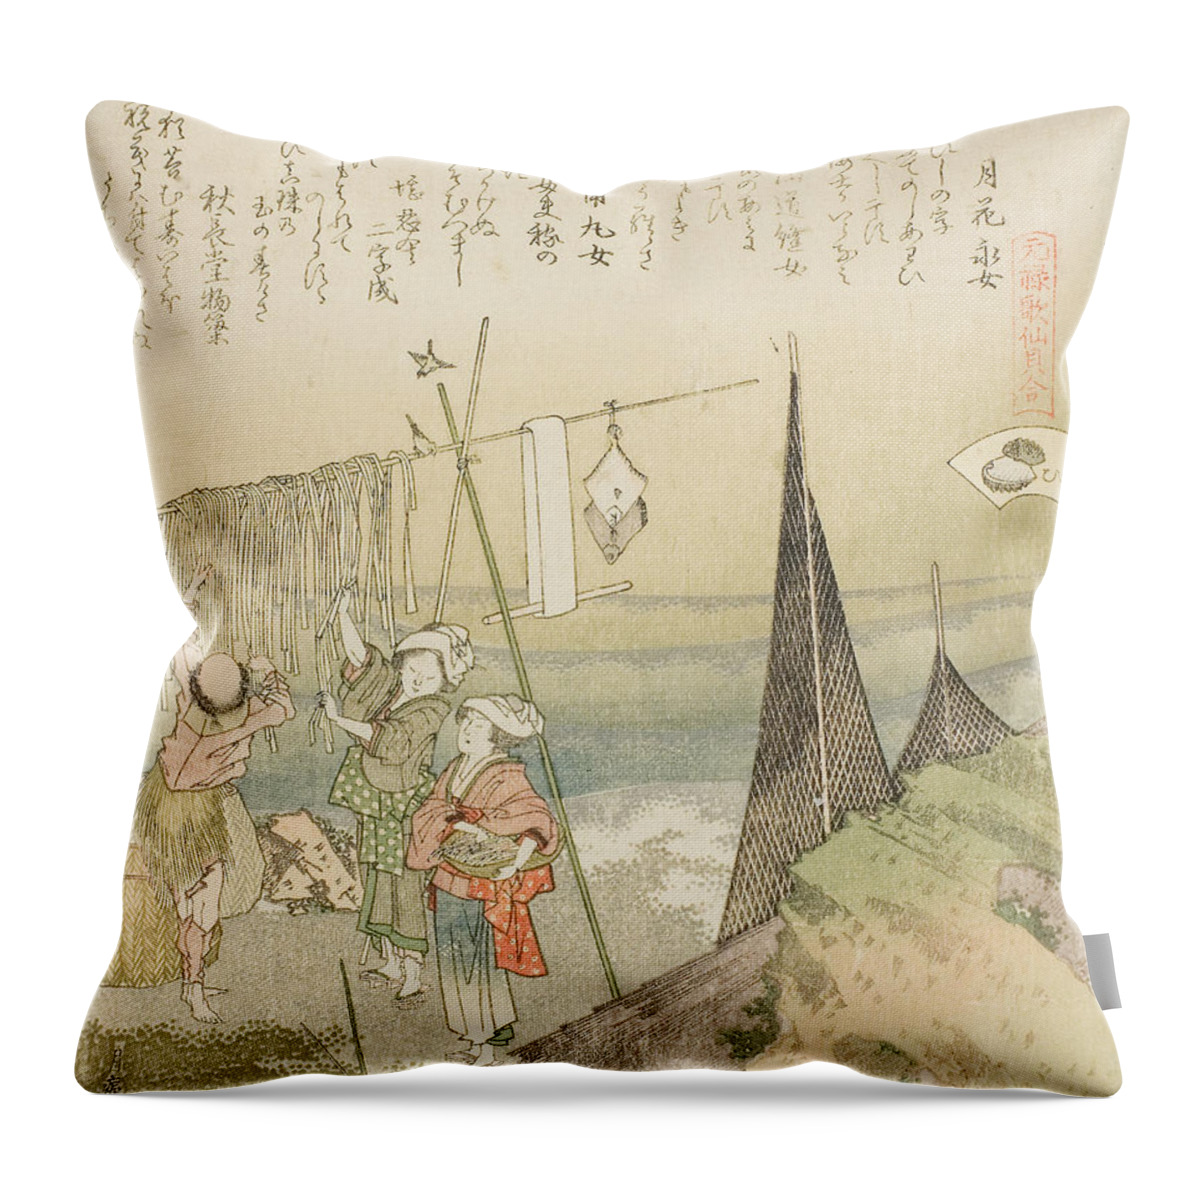 19th Century Art Throw Pillow featuring the relief Hanging Abalone Out to Dry by Katsushika Hokusai